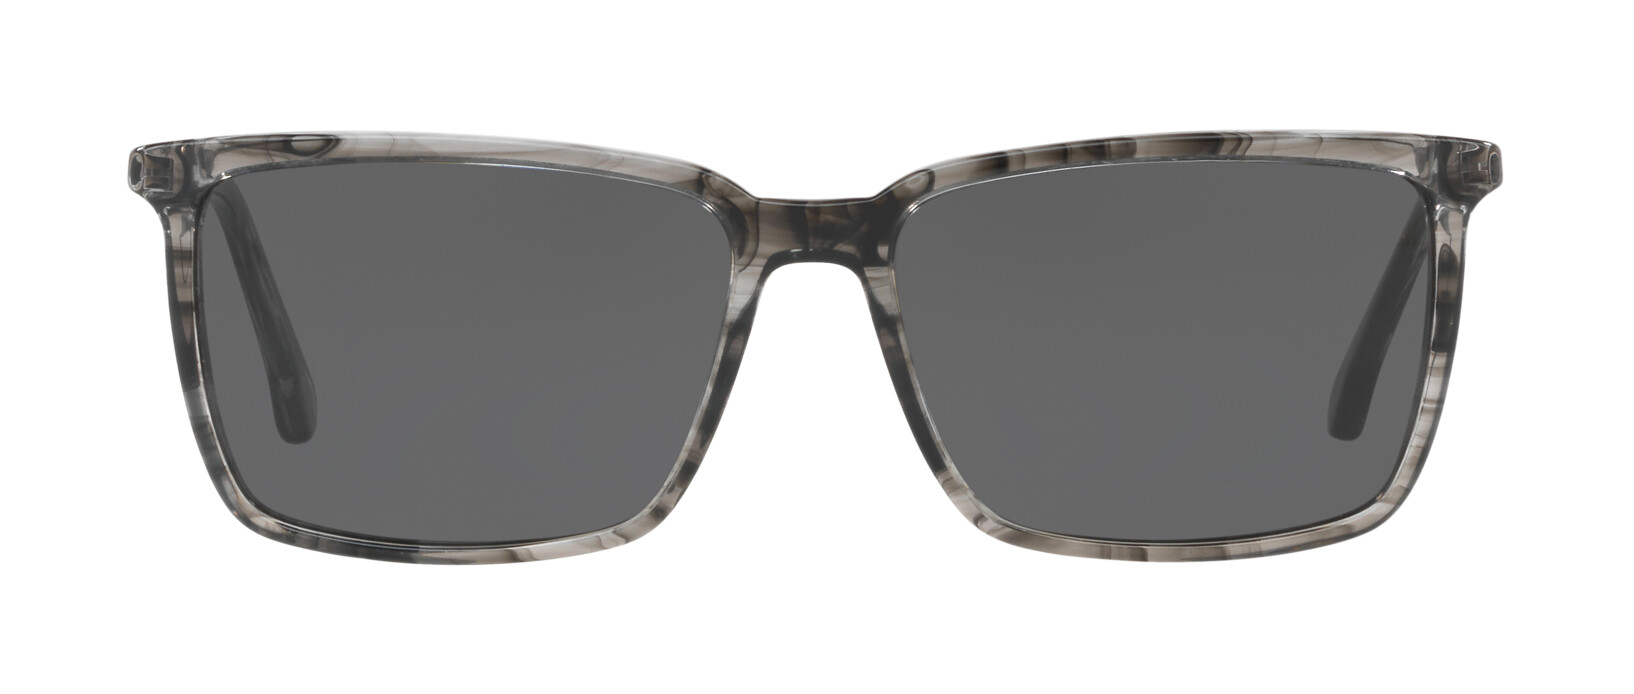 [products.image.front] Brooks Brothers 0BB5038S 614287 Sonnenbrille